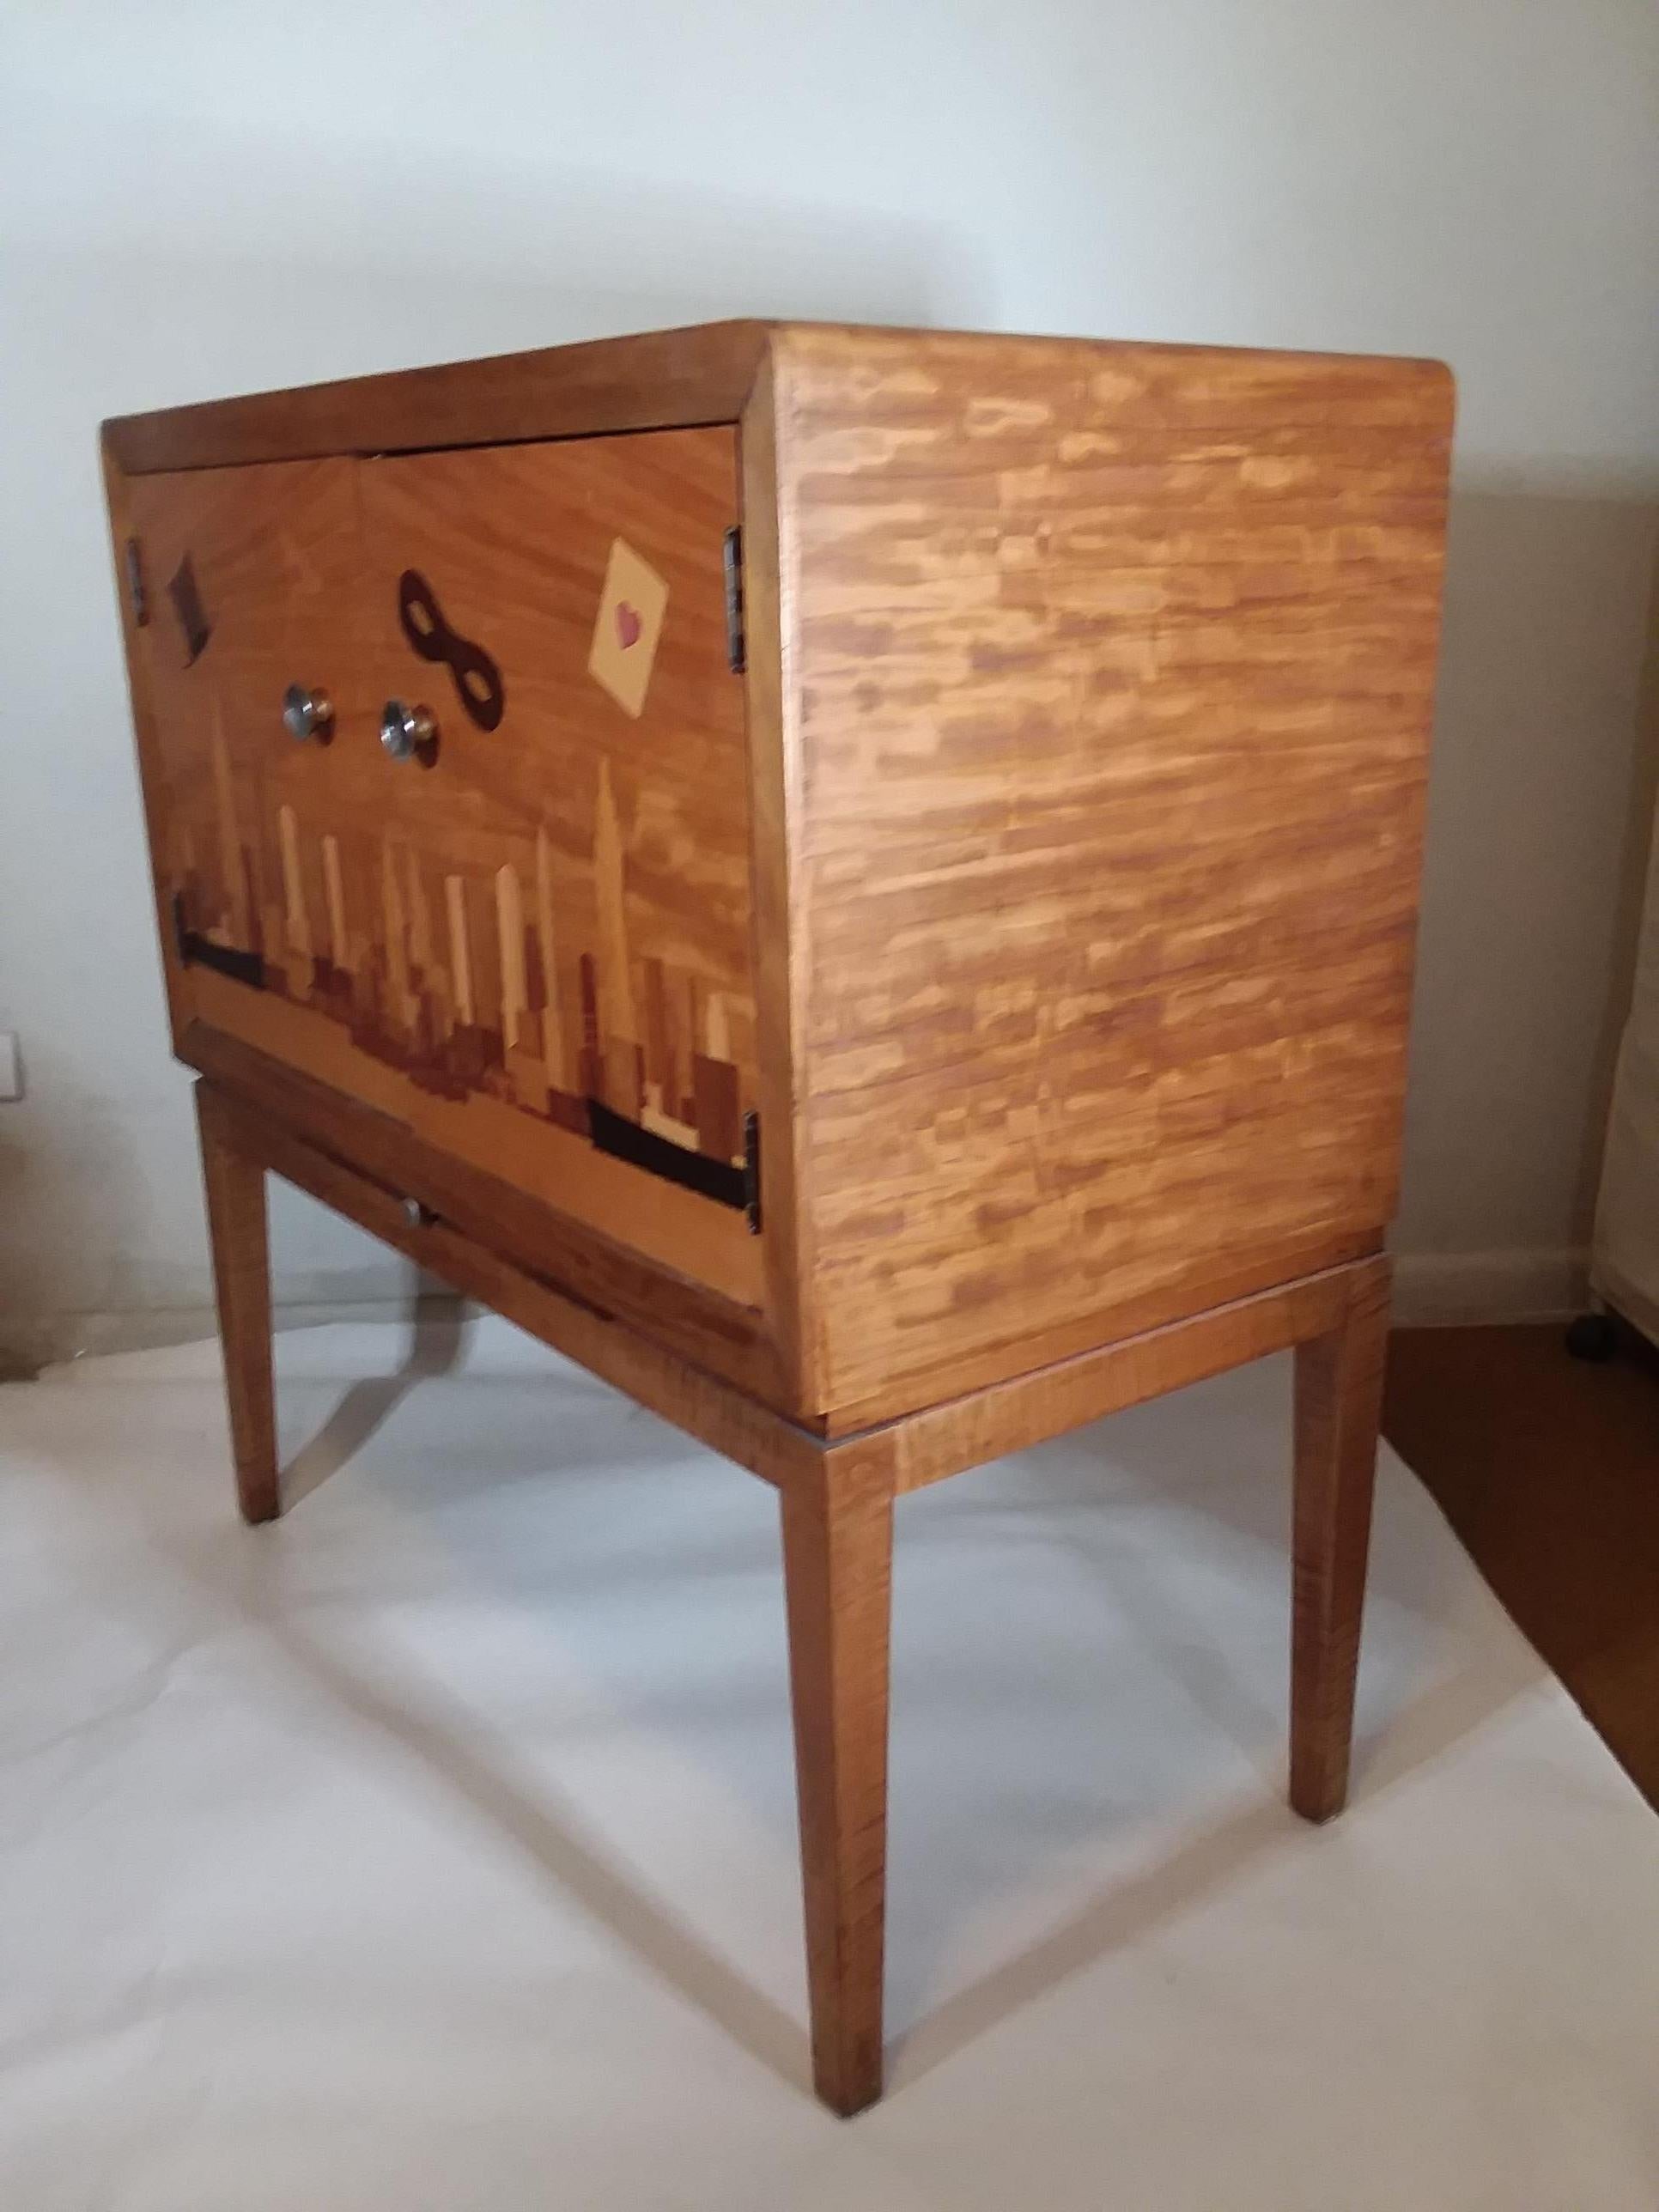 Iconic Art Deco Inlaid New York Bar Cabinet In Excellent Condition For Sale In Riverdale, NY